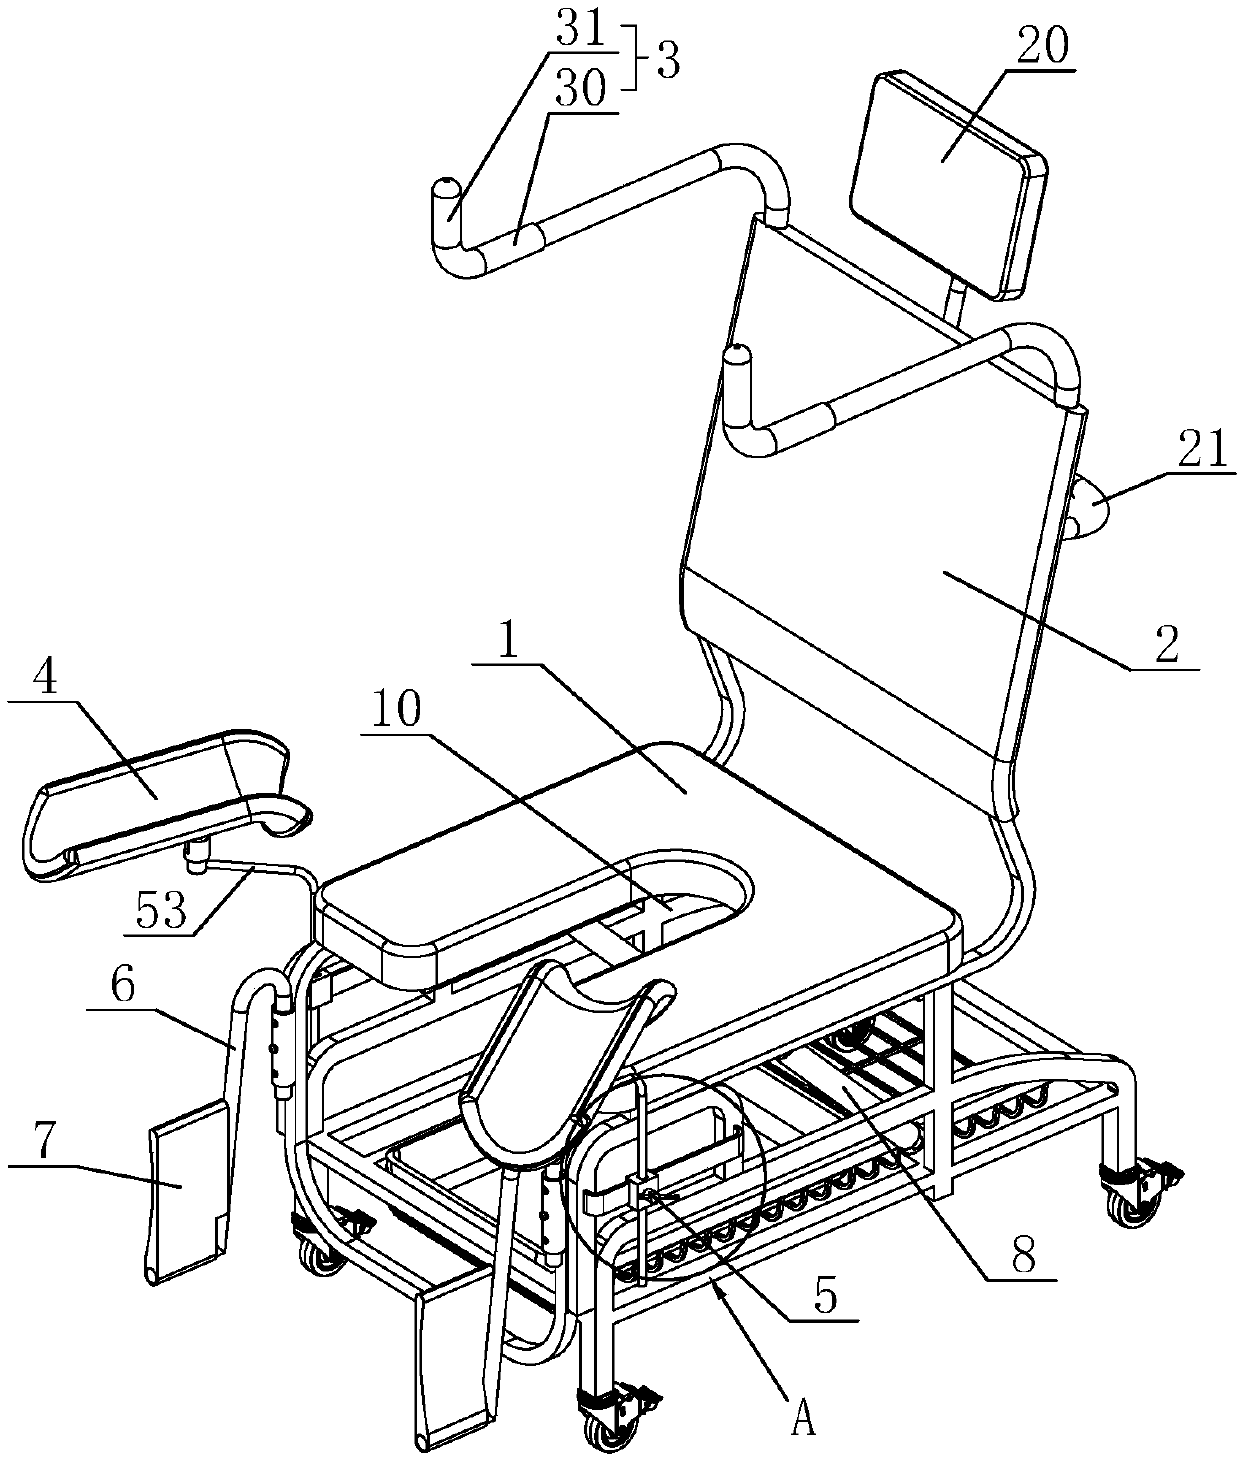 Sitting-type delivery chair with adjustable inclination angles